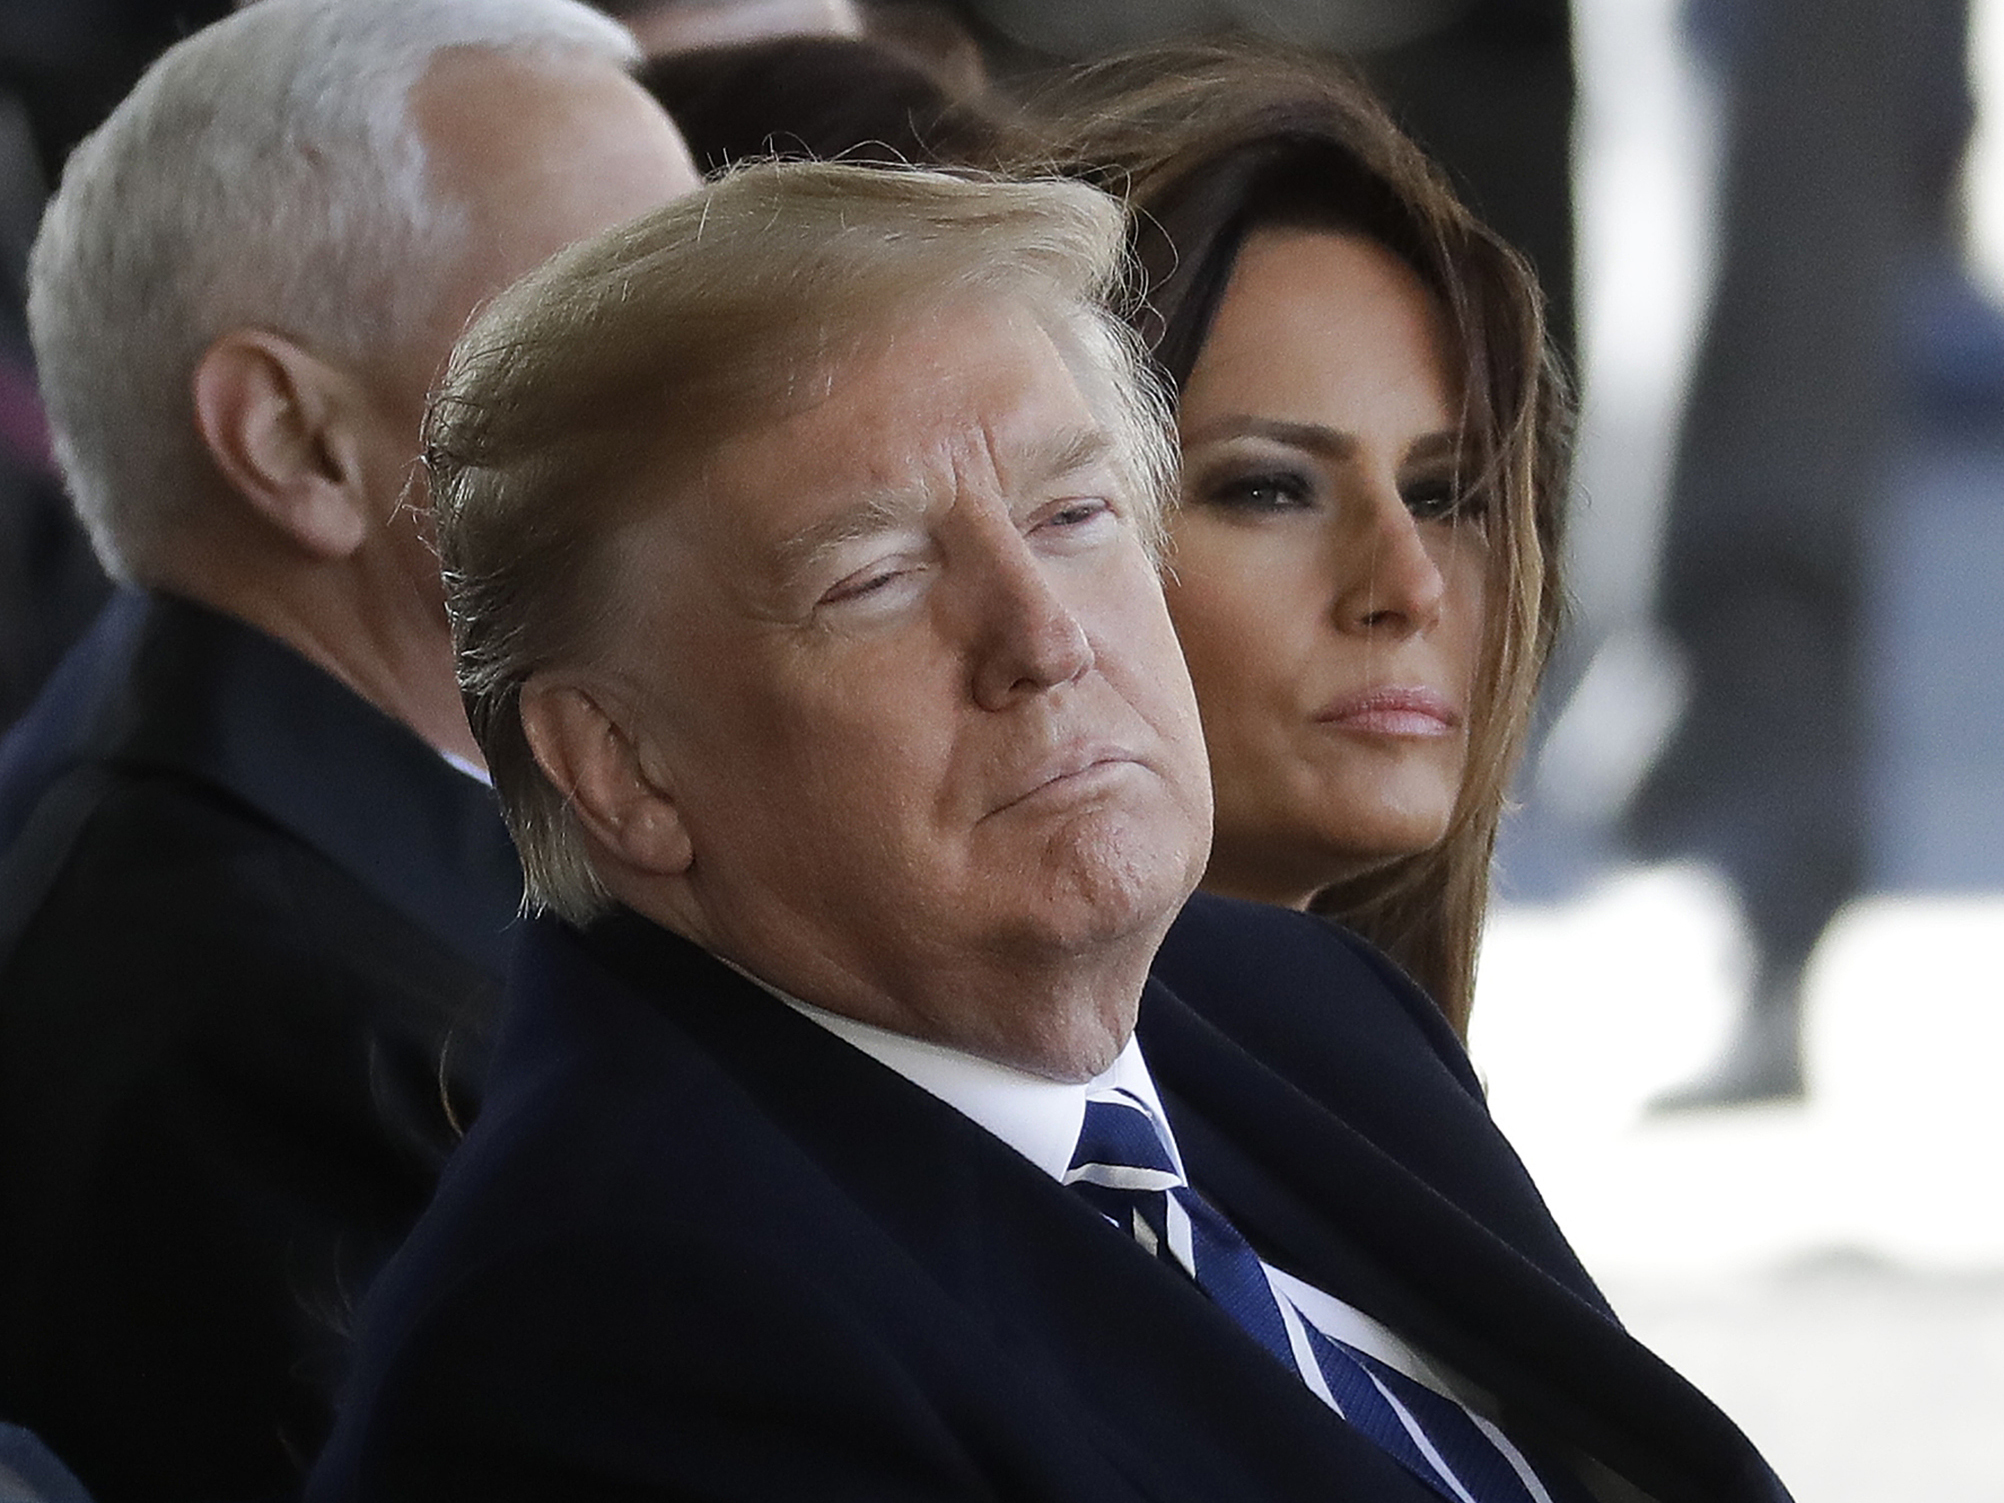 President Trump and First lady Melania Trump listen to a sermon during a funeral service for the Rev. Billy Graham on Friday.
